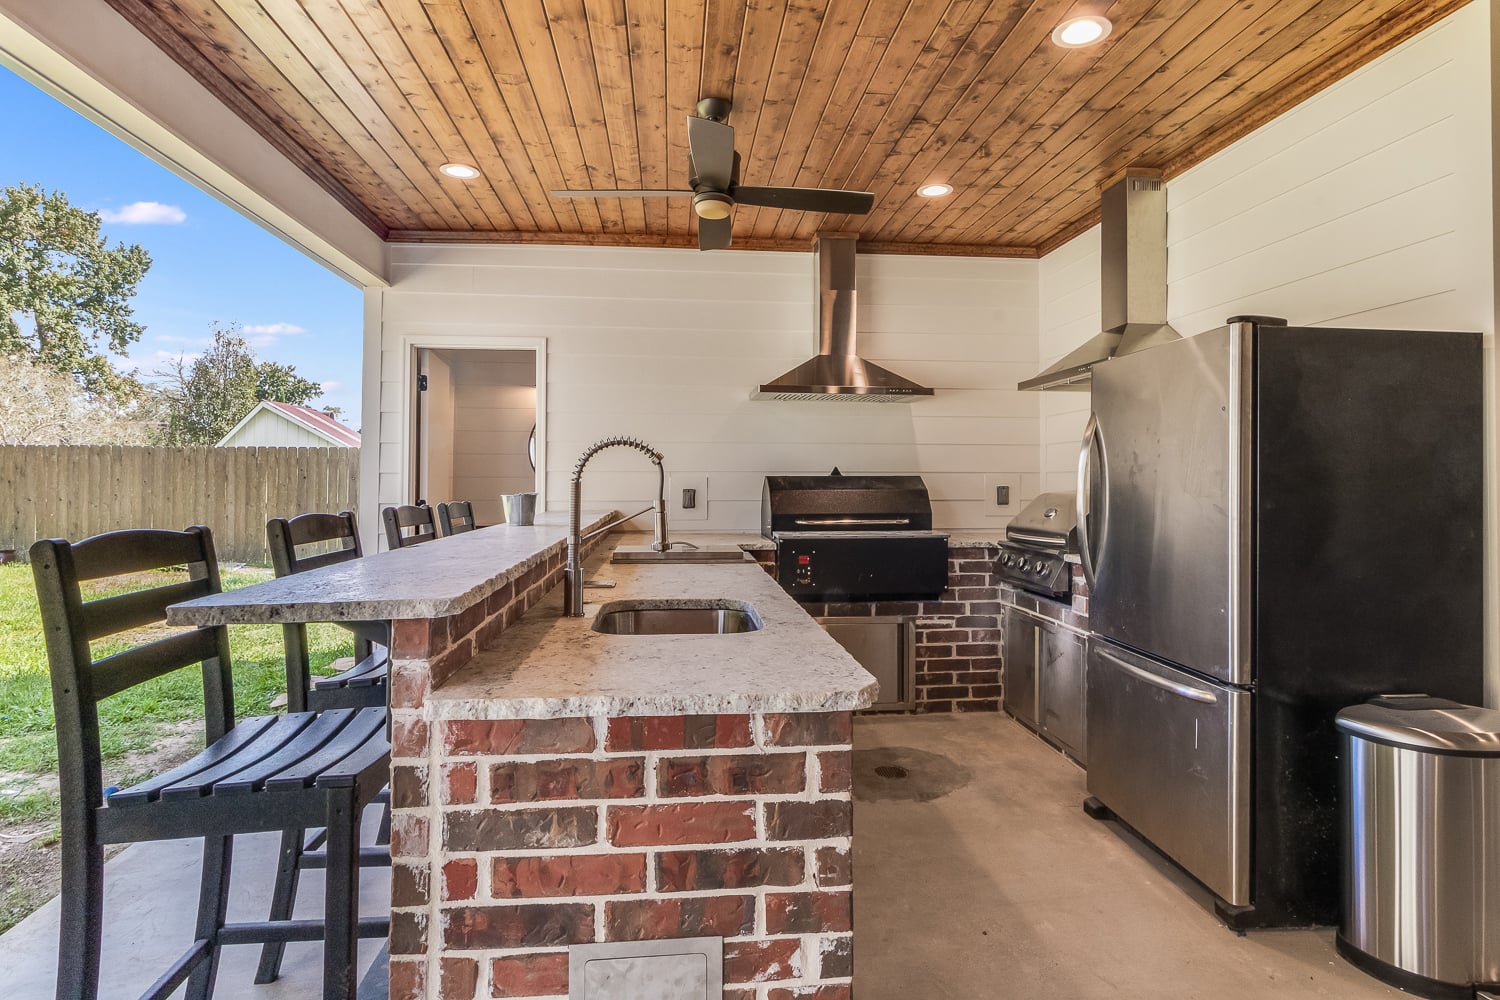 outdoor kitchen with fridge, two grills, sink, and chairs